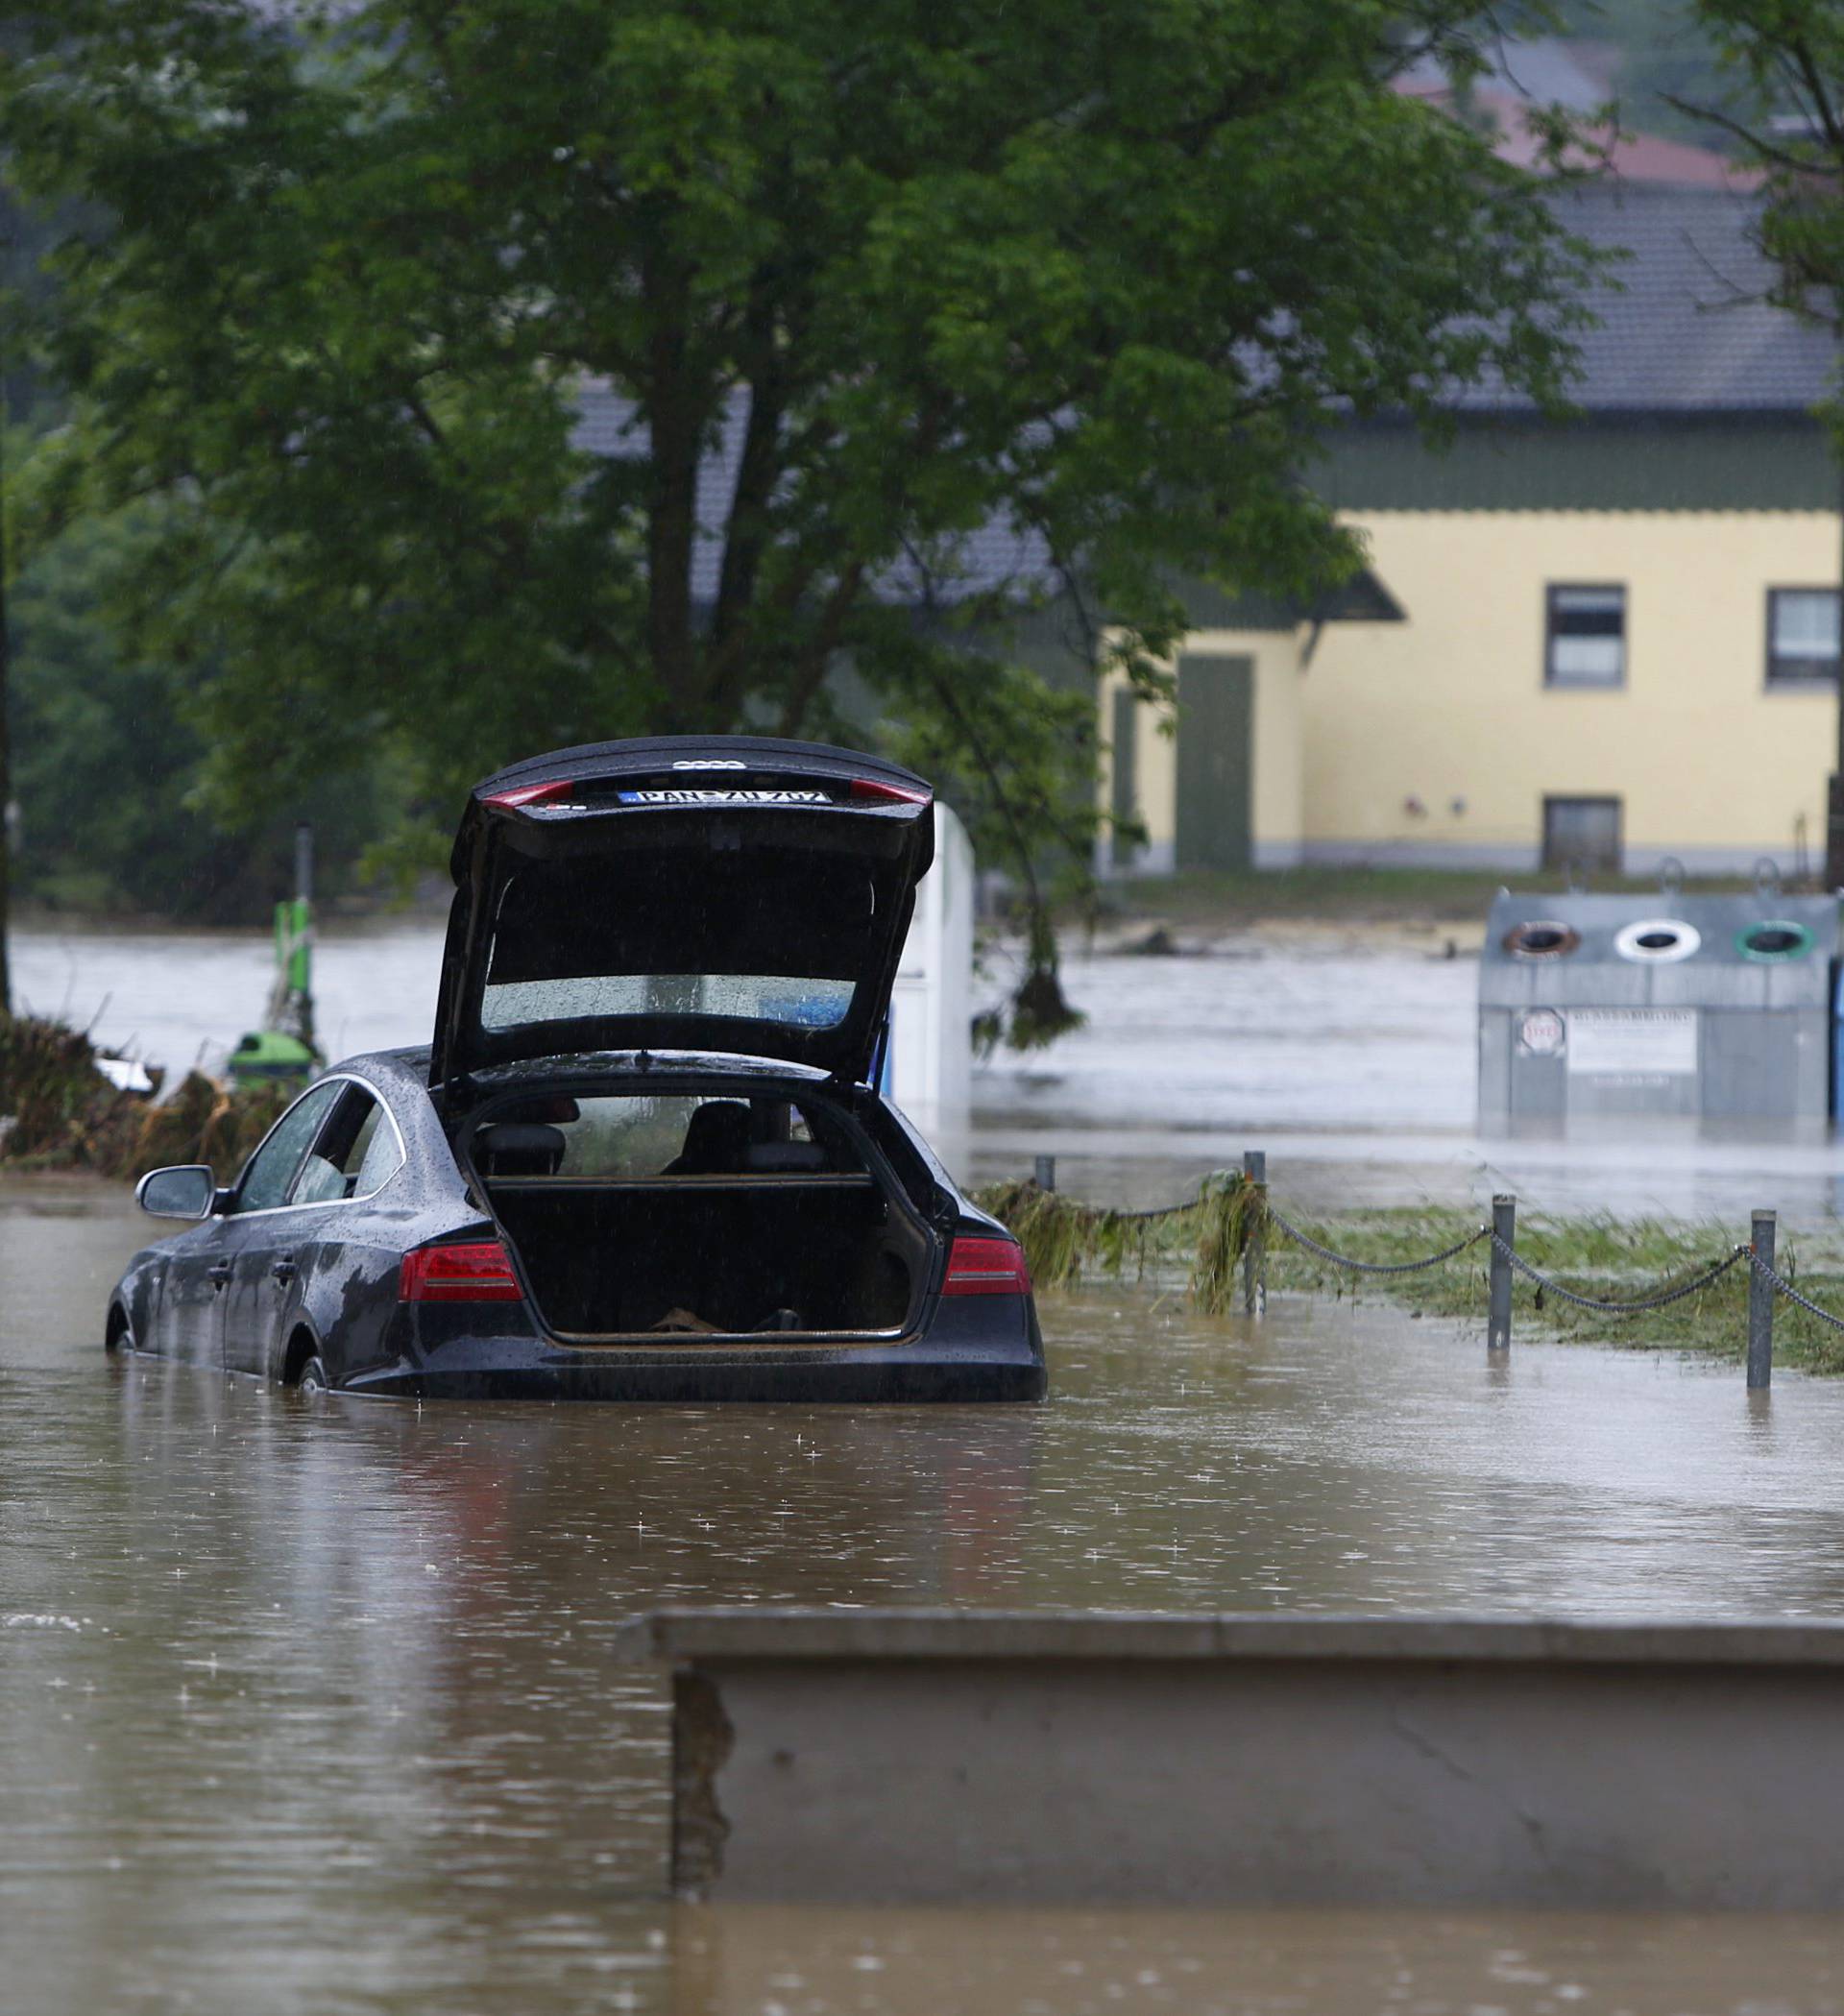 A car stands in the water in the flooded street in the Bavarian village of Triftern